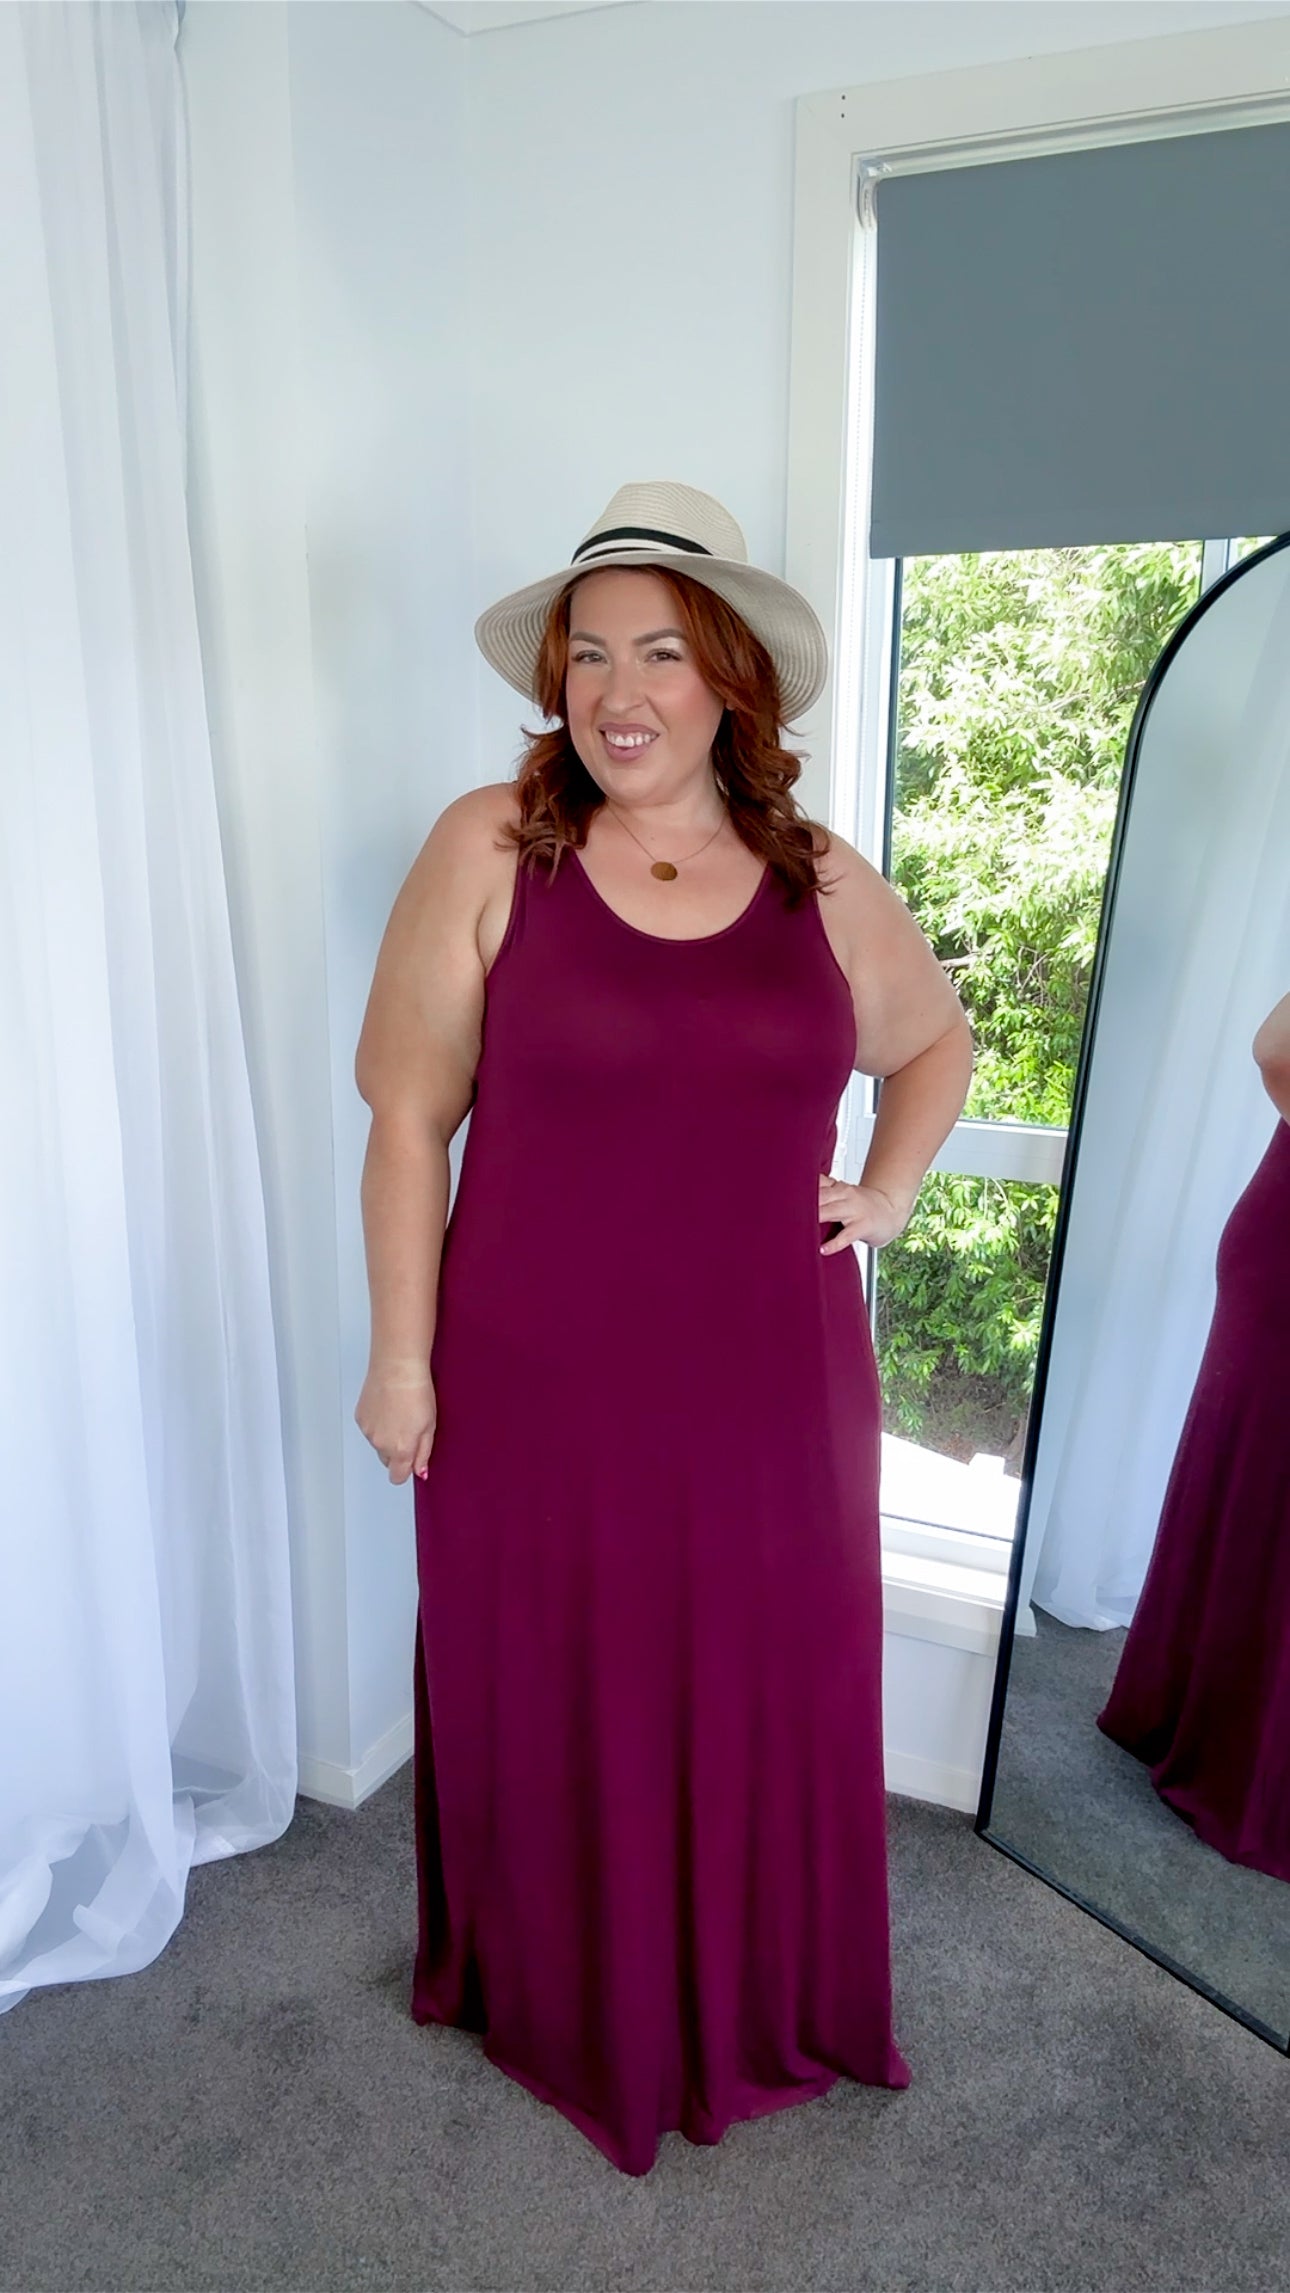 The Curvy Girl Guide: Super Woman Chic